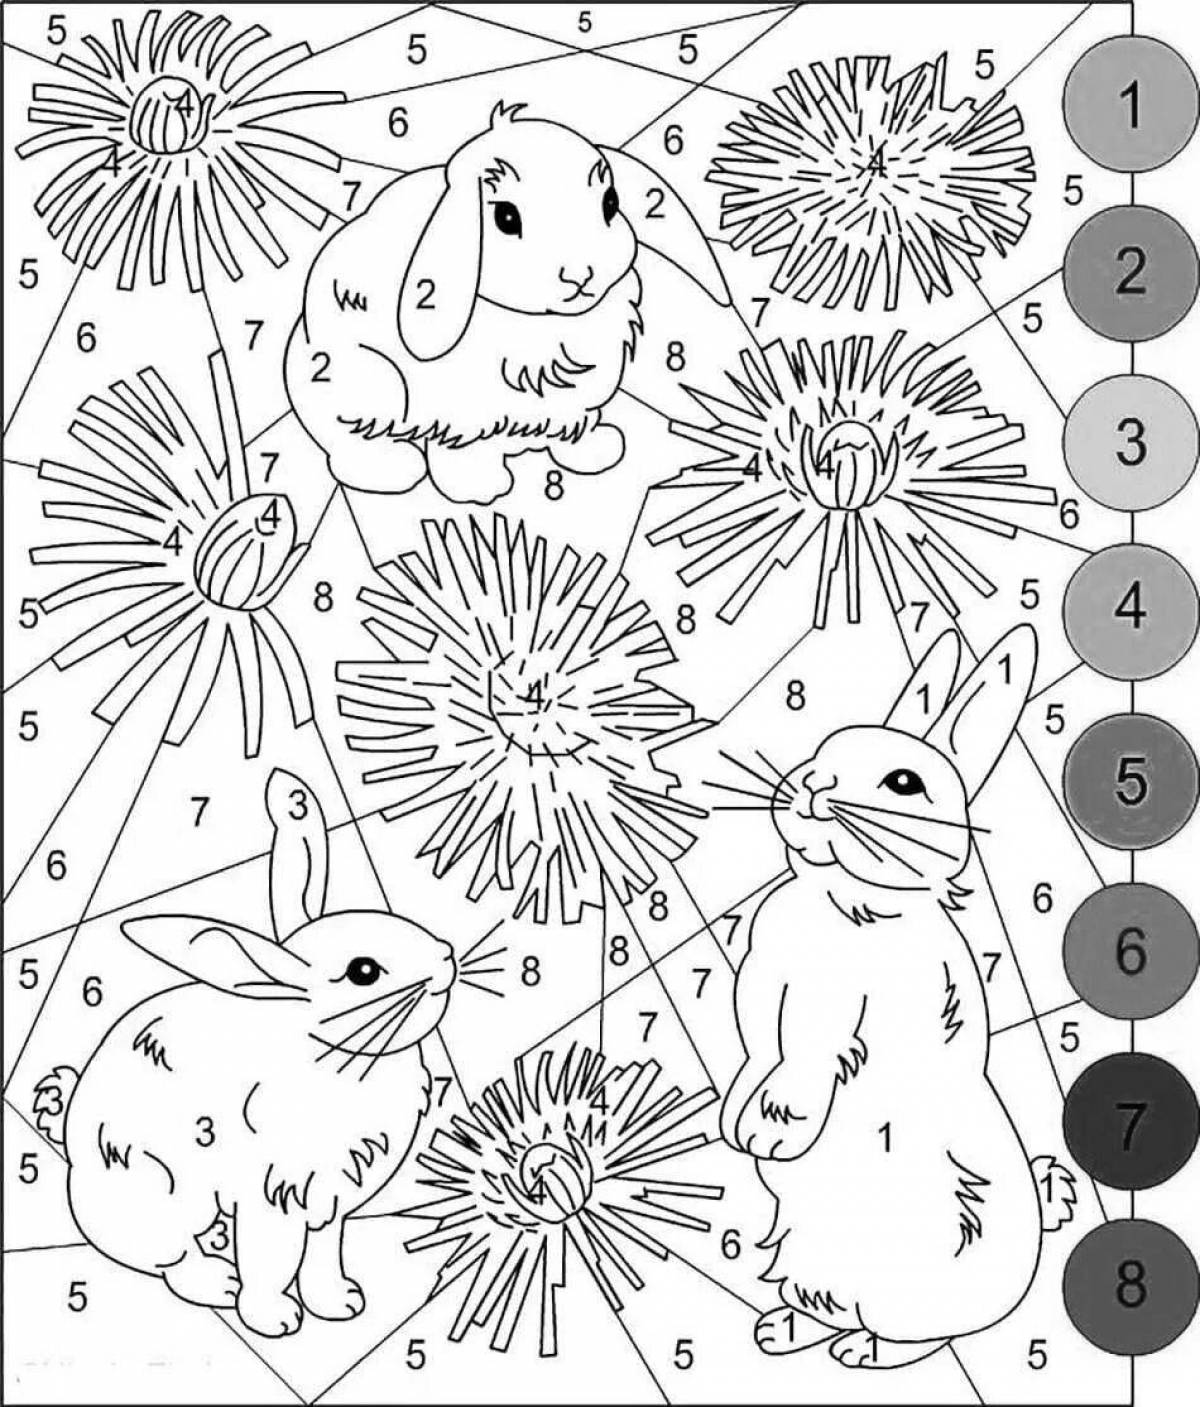 Playful animal coloring by numbers